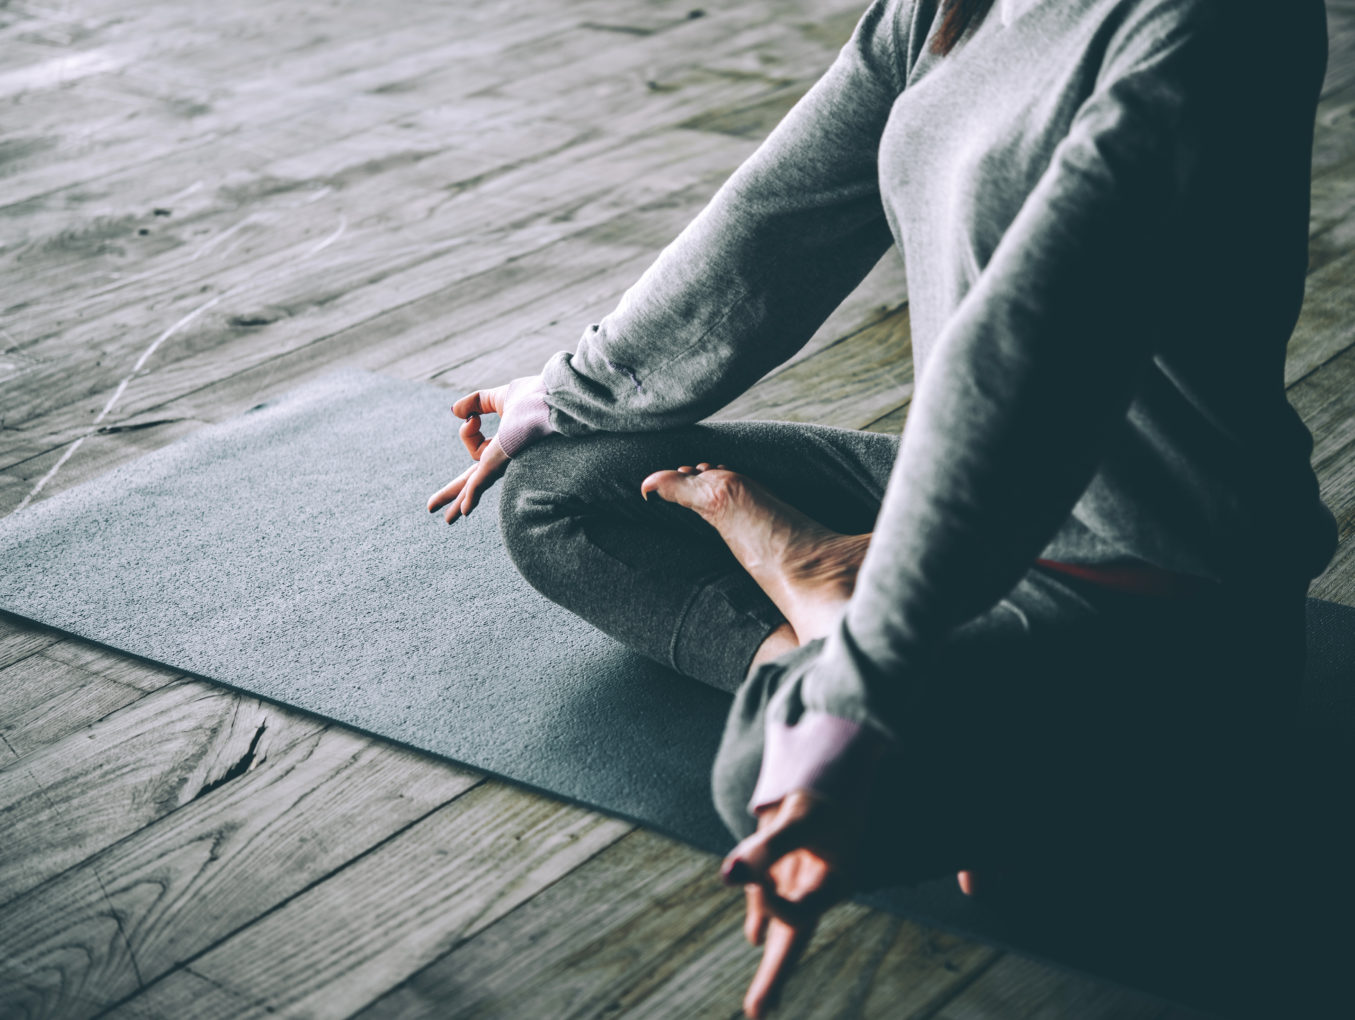 How do Yoga and Massage go together?